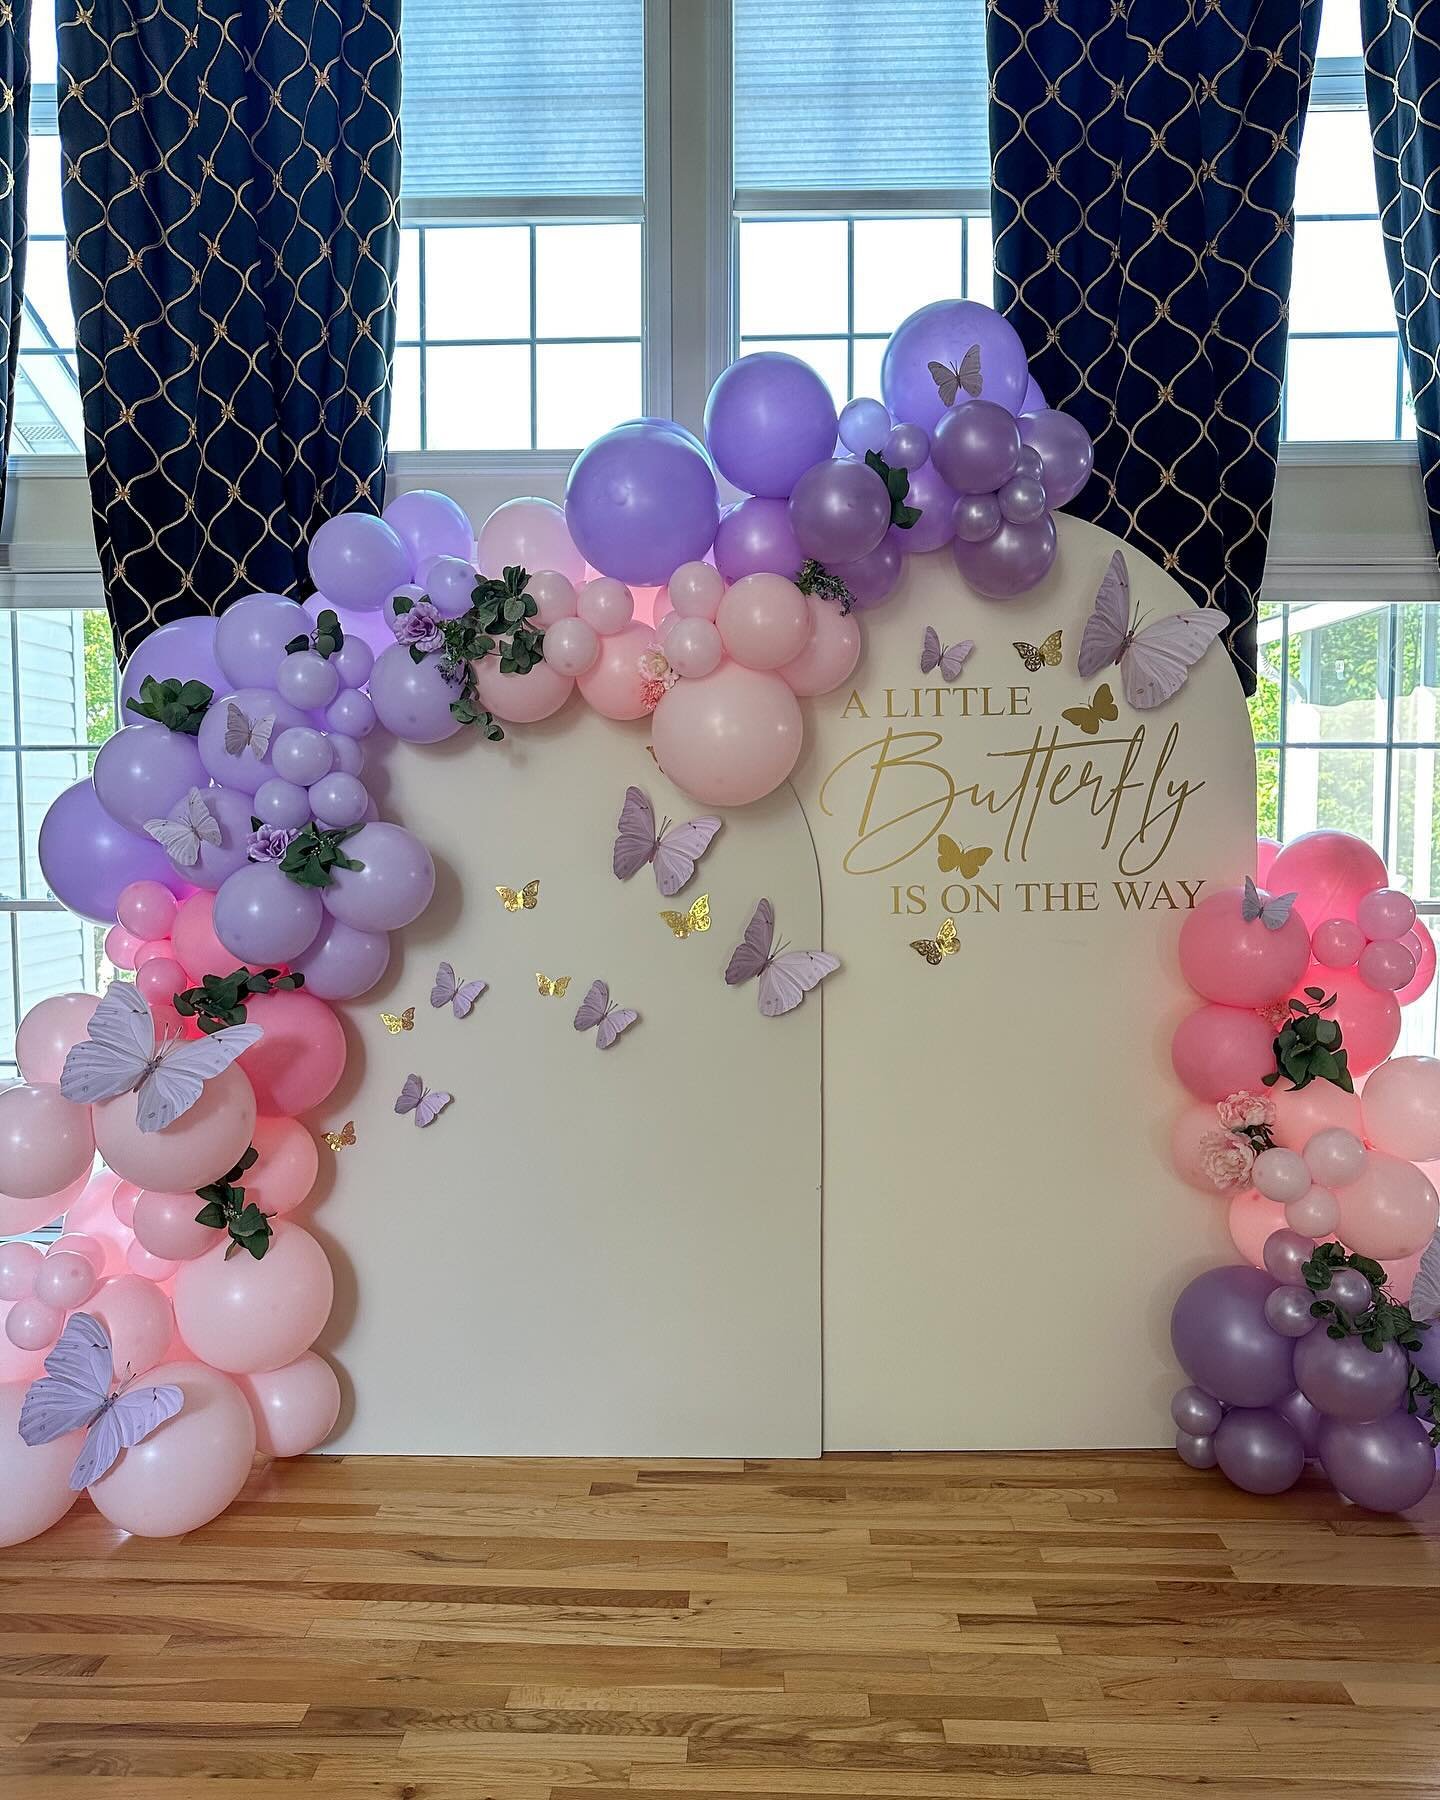 Another little Butterfly is on the way! 🦋 
・・・ 
Backdrop + Balloons by @partywithlex 
&bull;
&bull;
&bull;
&bull;
&bull;
#stlballoons #stlkidsparties #butterflygarden #butterflyparty #butterflyballoons #butterflycake #butterflycakes #butterflycakepo